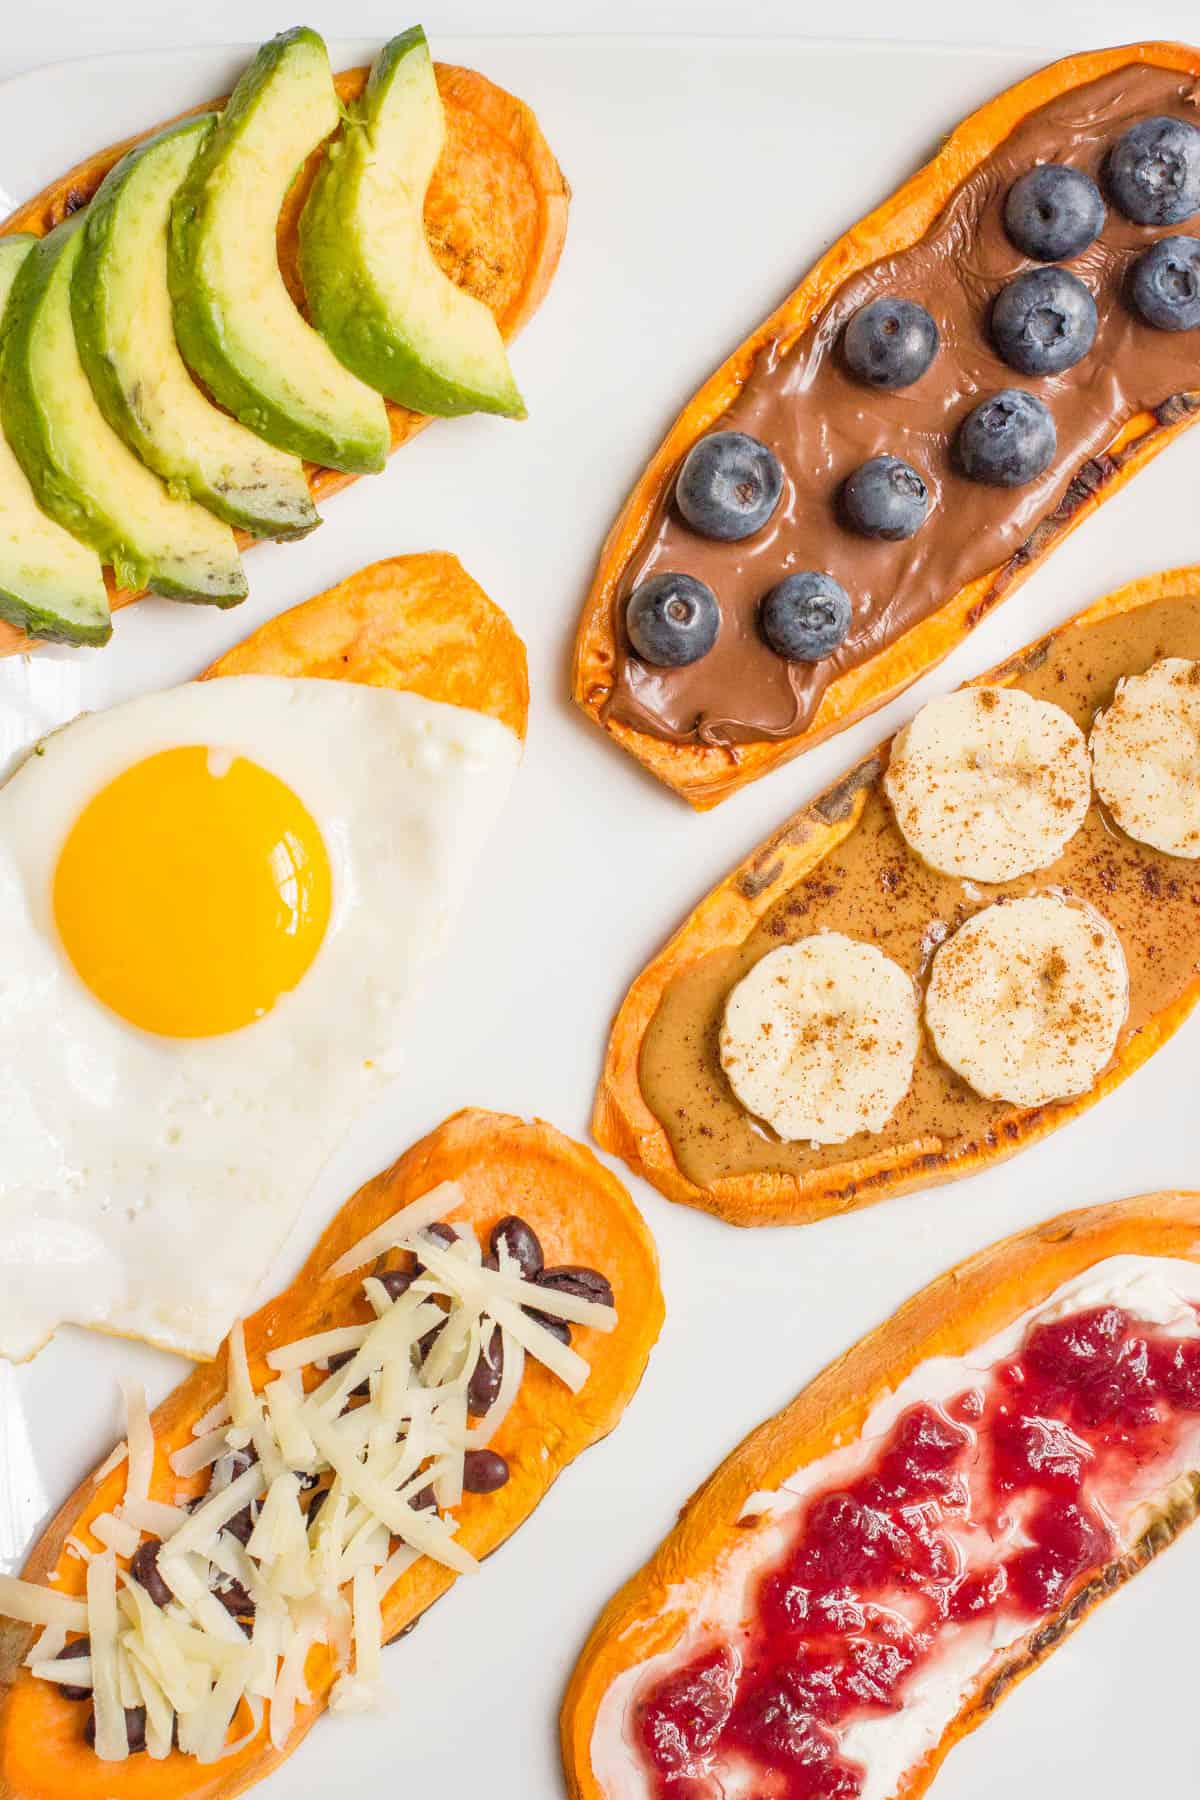 Six slices of sweet potato toast on a white plate, each with different toppings.